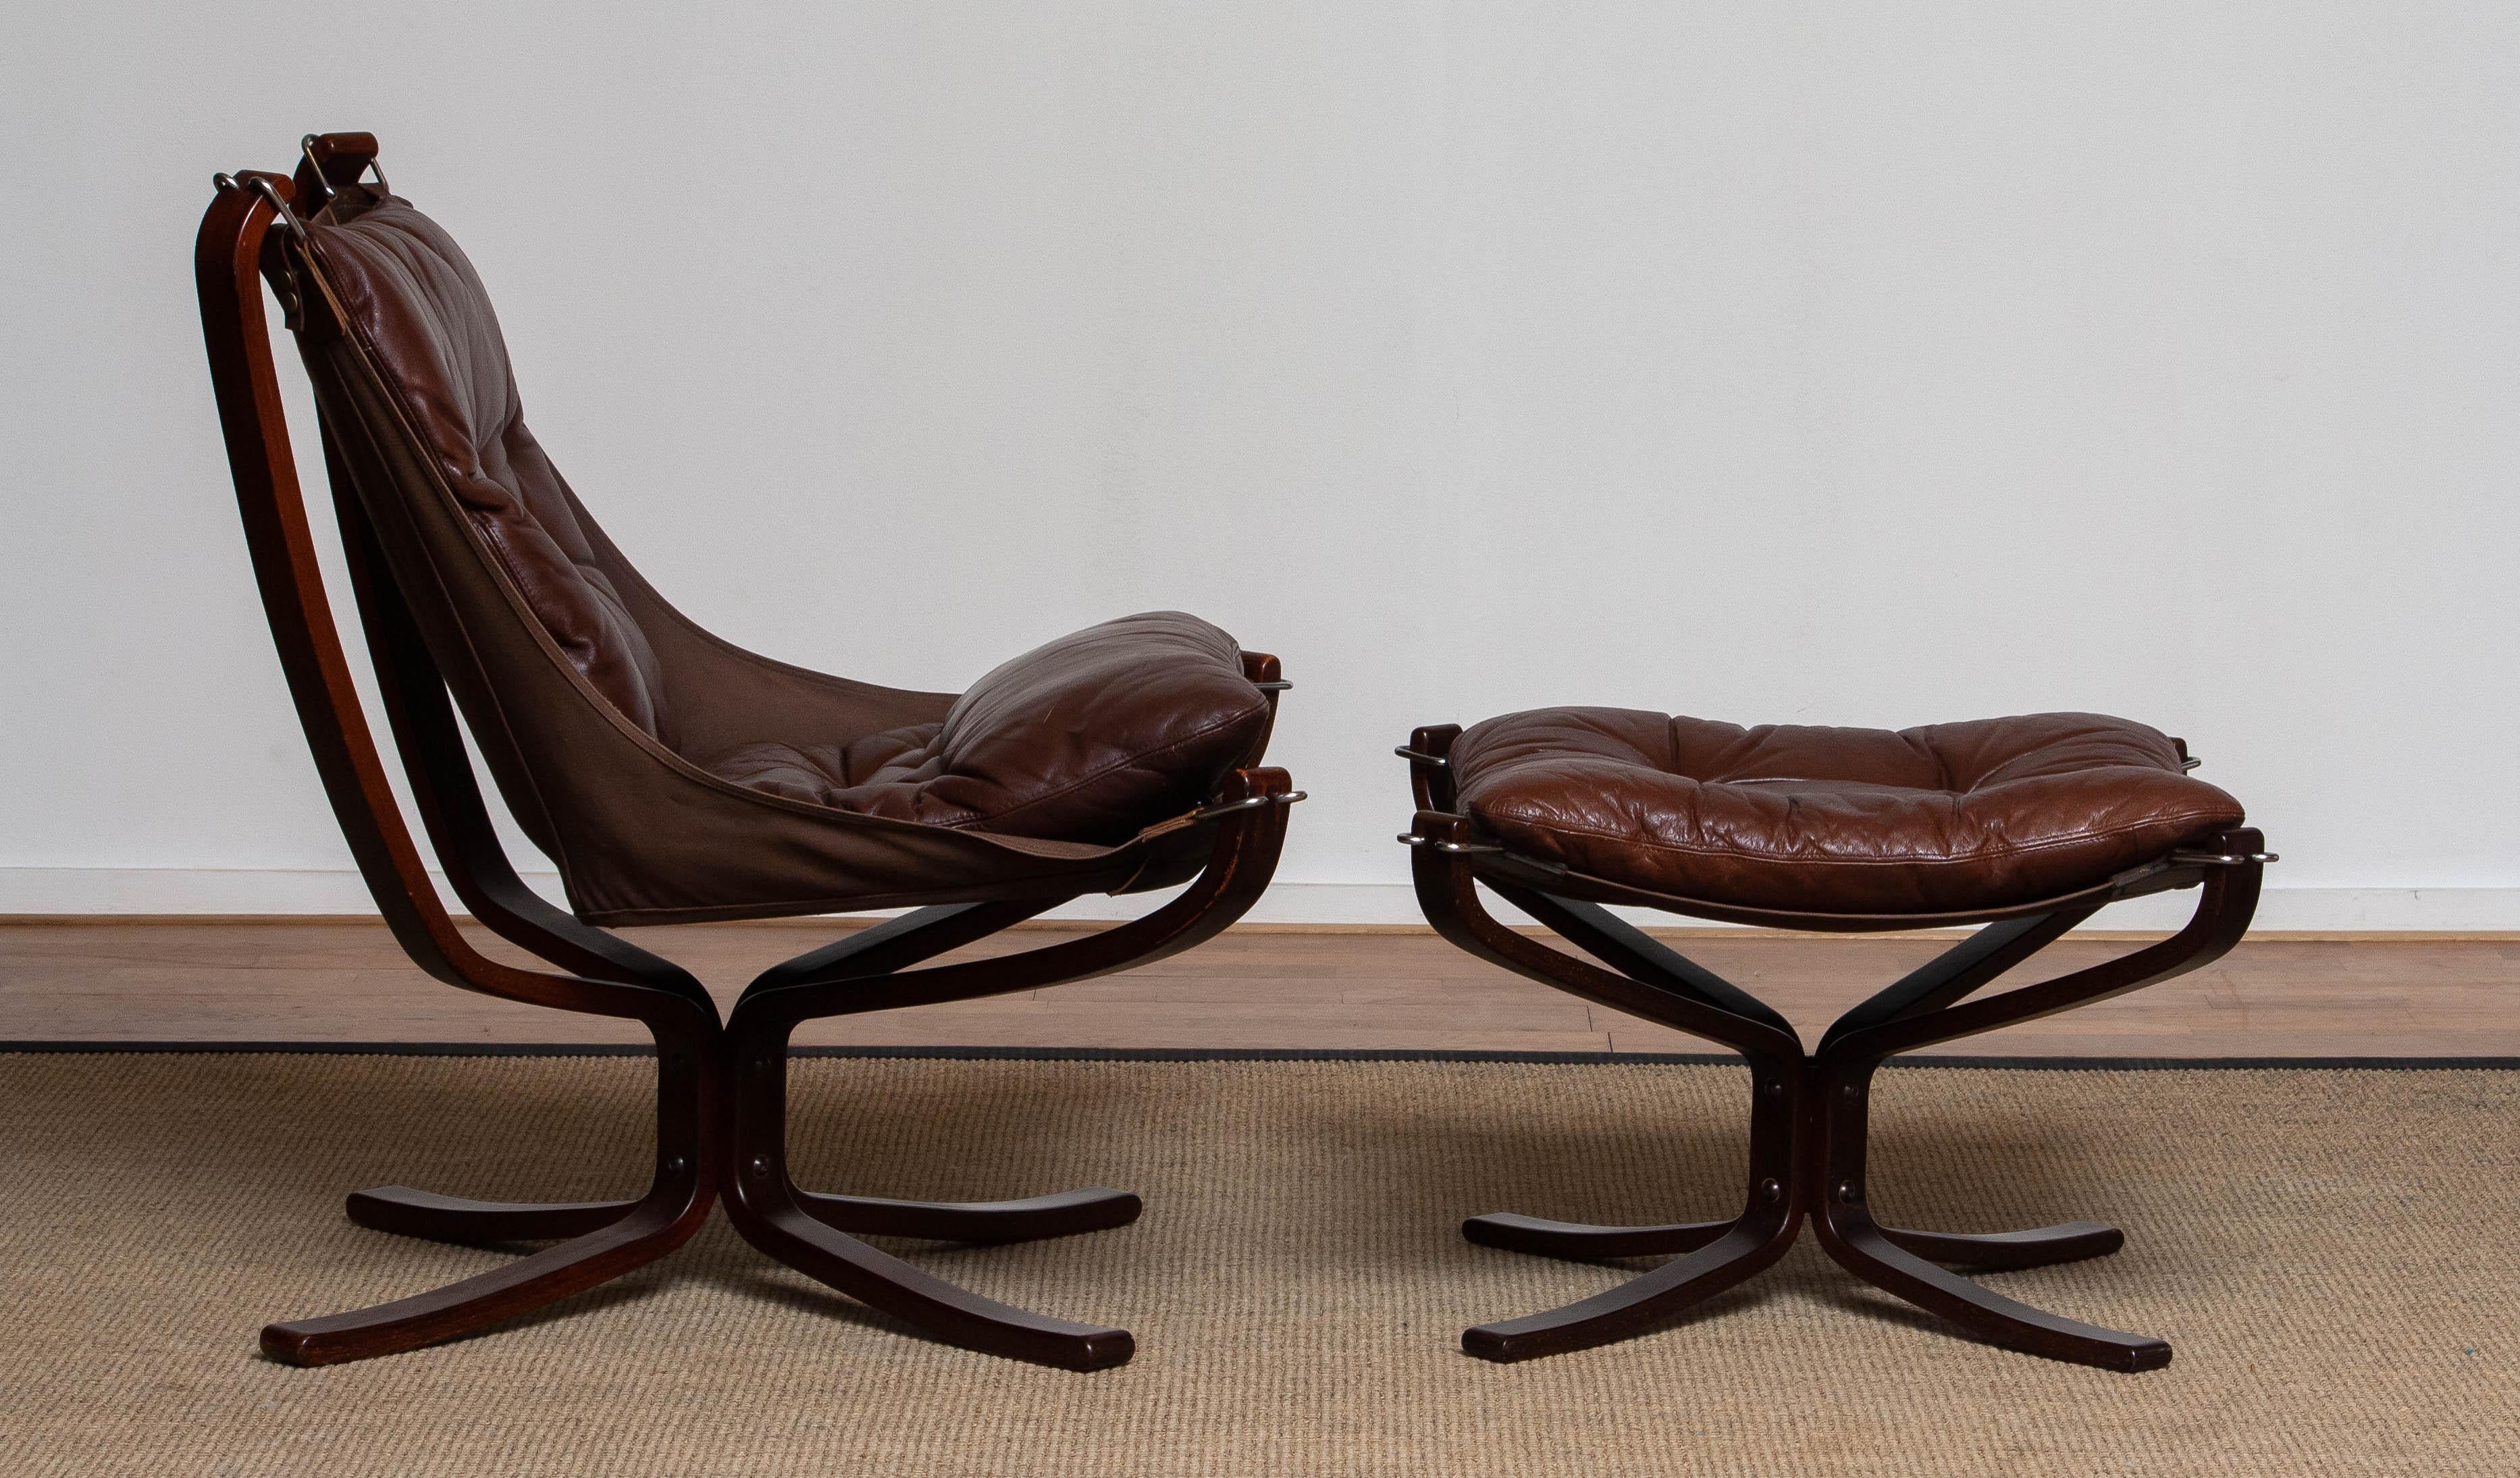 Beautiful set of 1970's chocolate brown 'Falcon' lounge chair and ottoman designed by Sigurd Ressel for Vatne Möbler in Norway.
This 'Falcon' chair is in overall good condition and the leather shows a great patina true the years.
Please note that